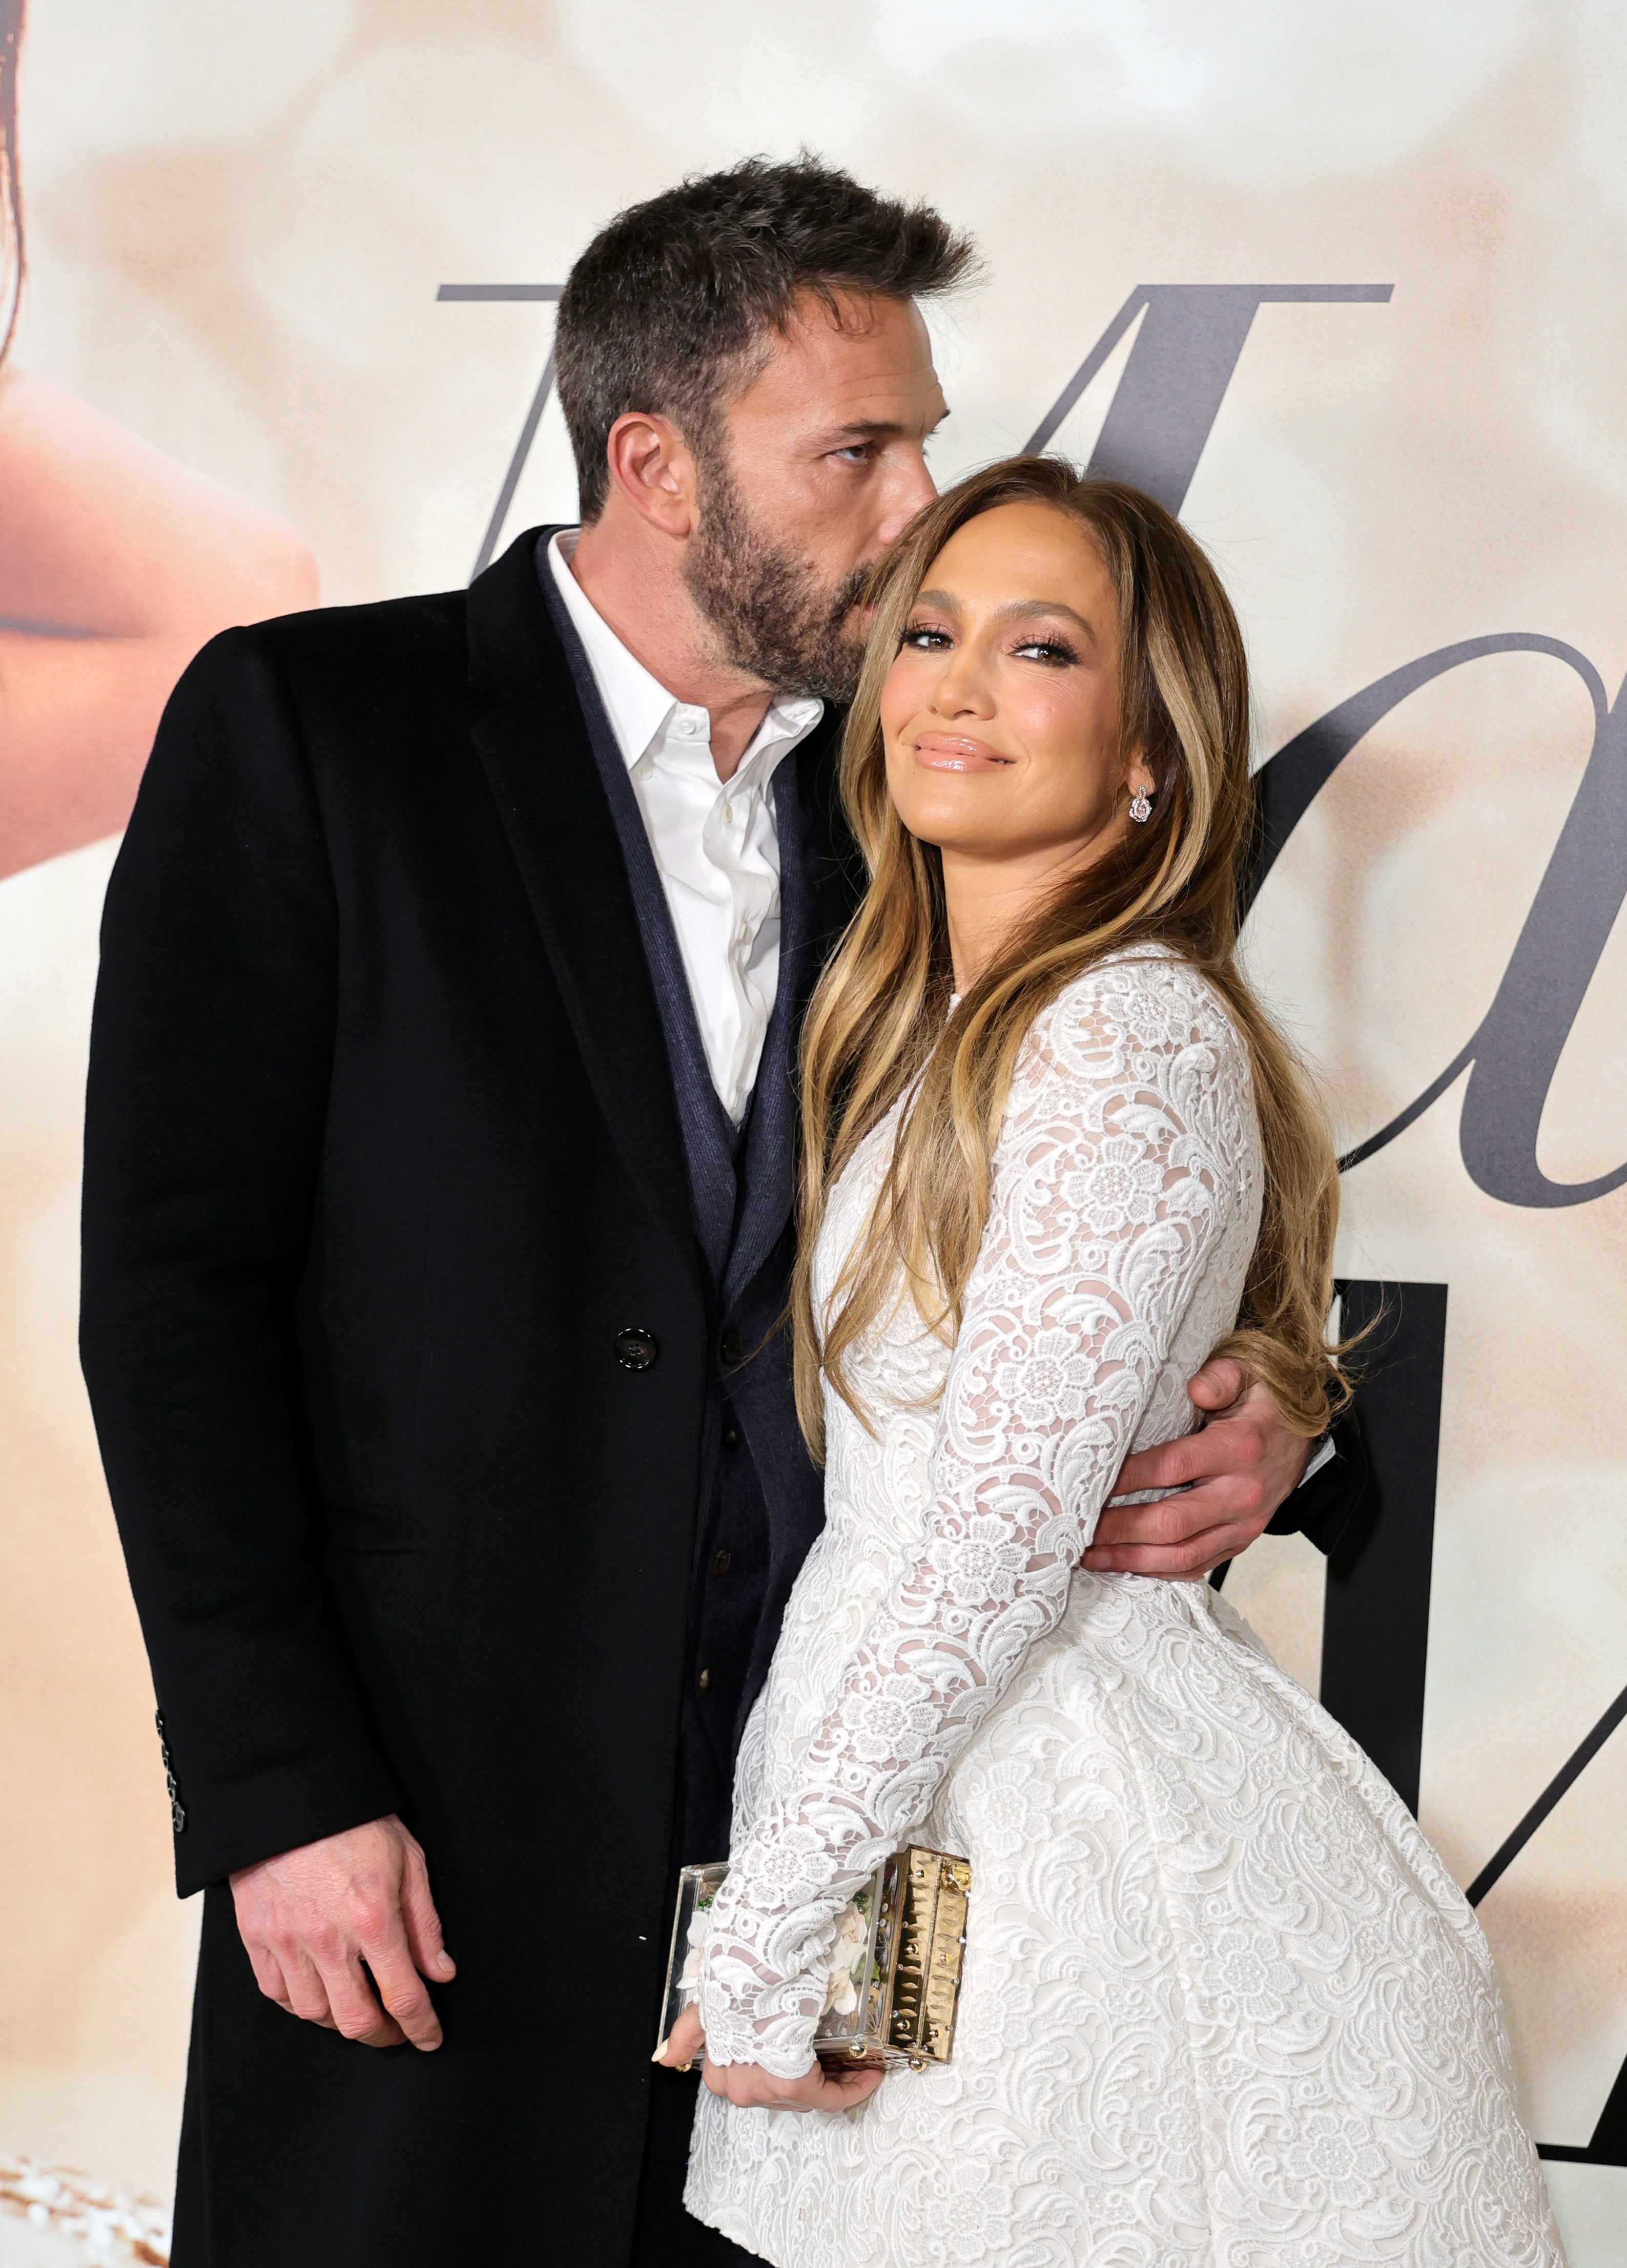 Ben Affleck and Jennifer Lopez attend the Los Angeles Special Screening of Marry Me on Feb. 08, 2022 in Los Angeles, California.